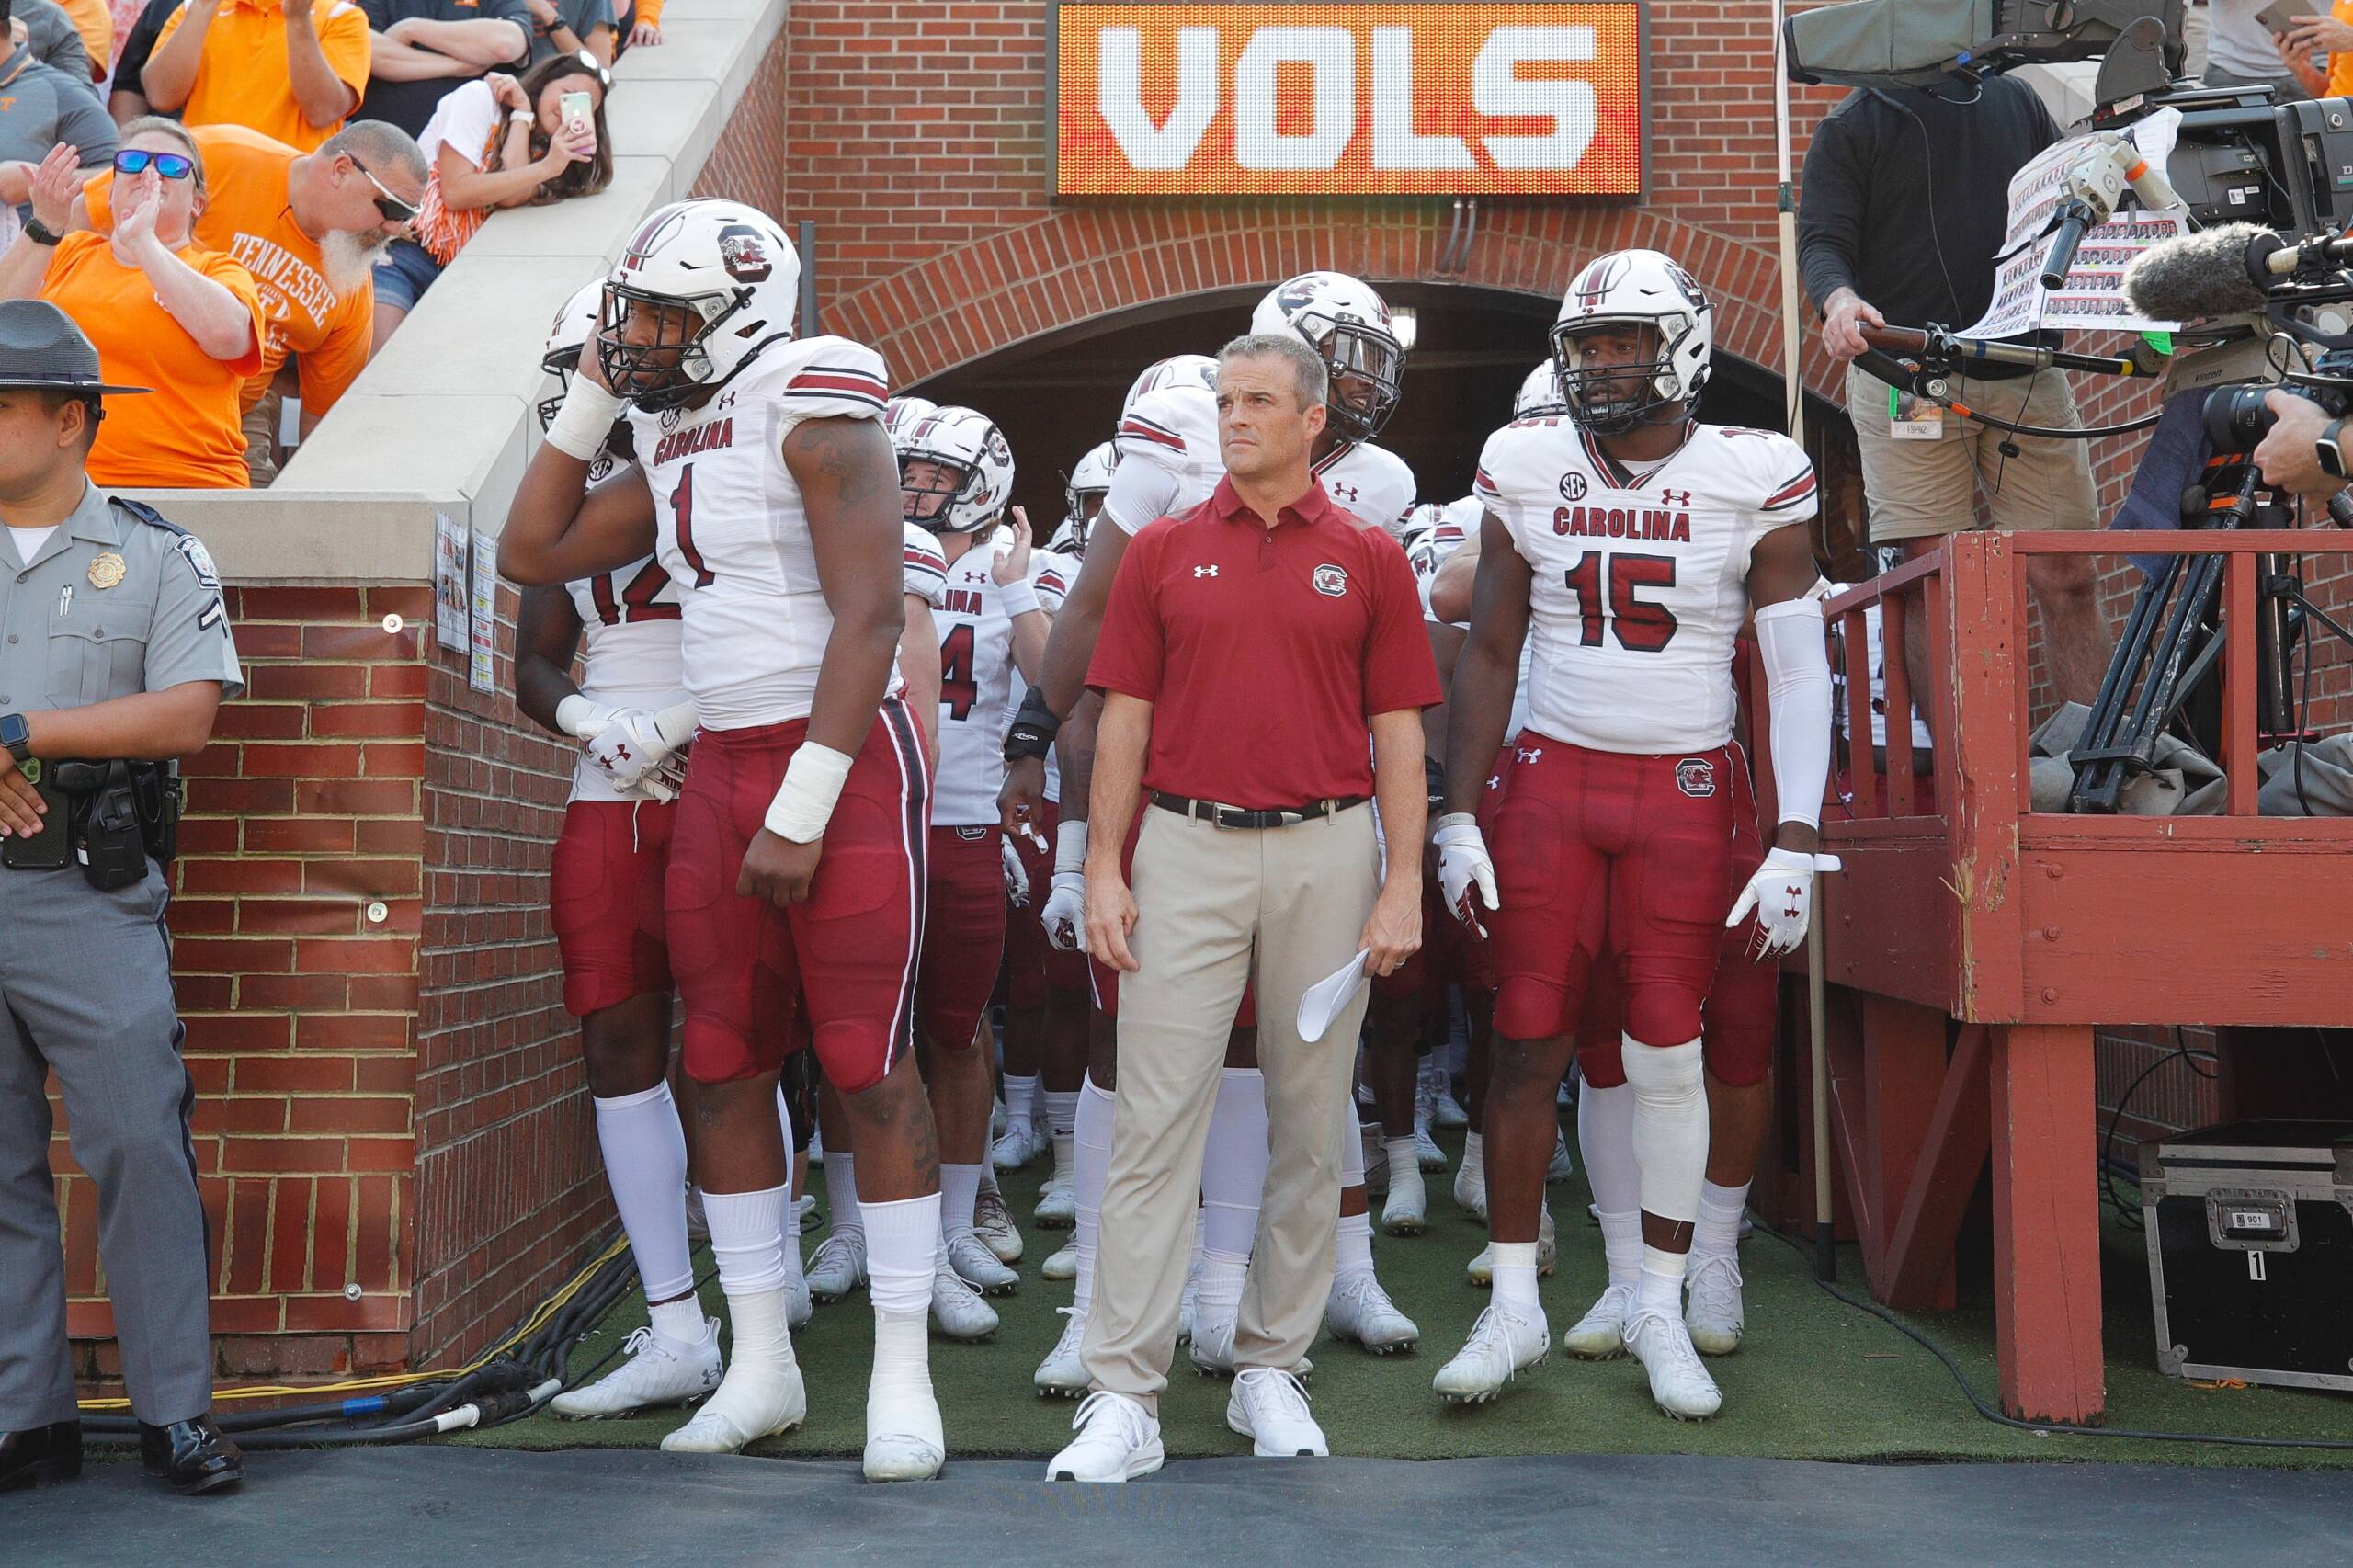 Gamecocks Travel to Tennessee for Saturday Showdown